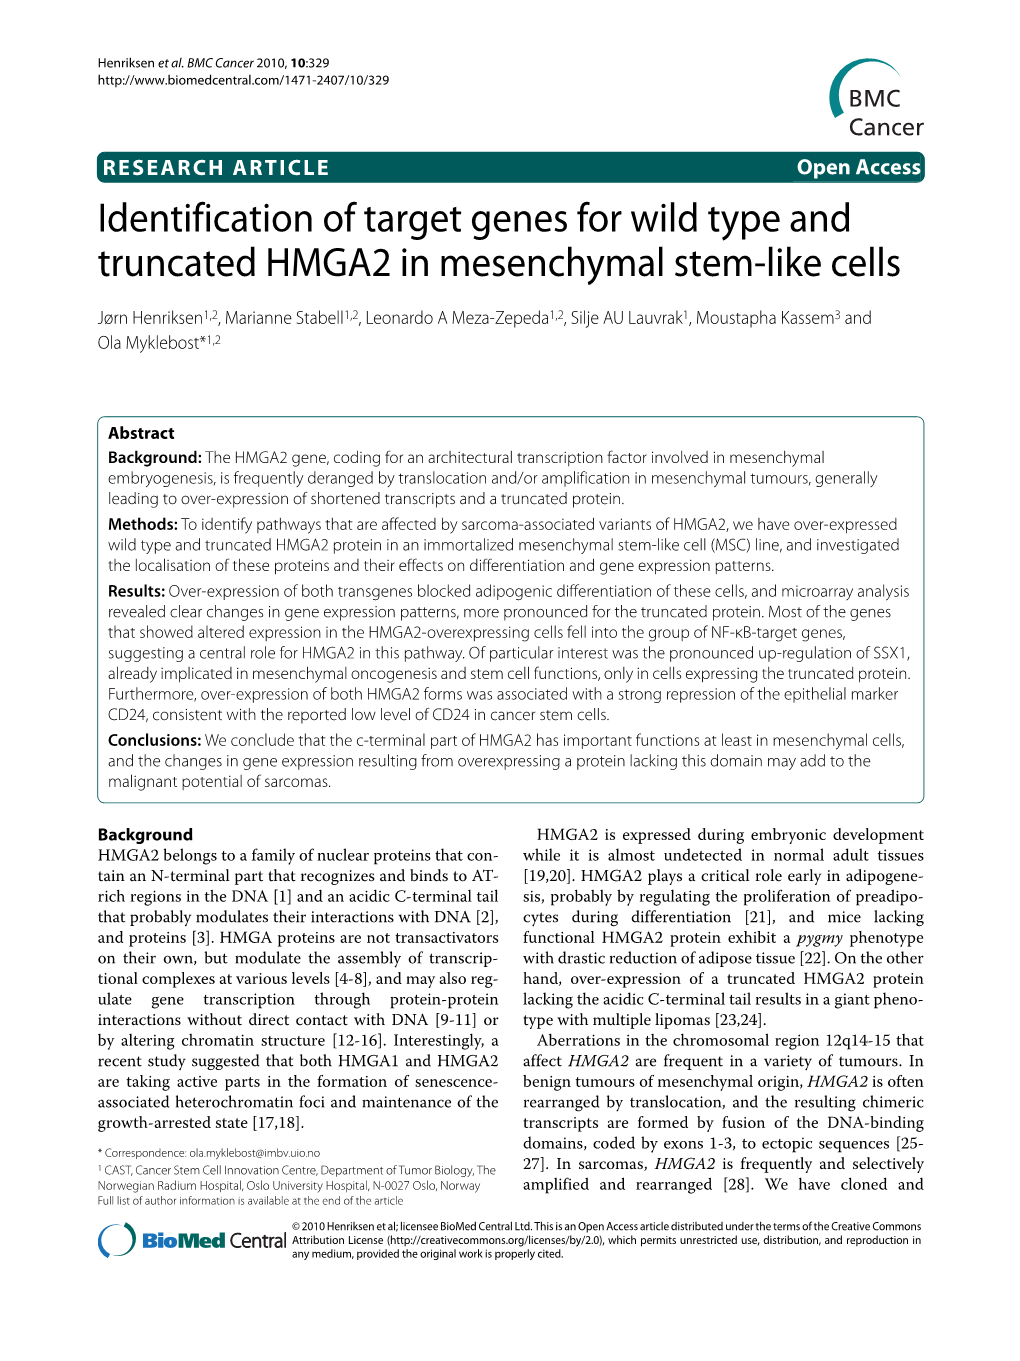 Identification of Target Genes for Wild Type and Truncated HMGA2 in Mesenchymal Stem-Like Cells BMC Cancer 2010, 10:329